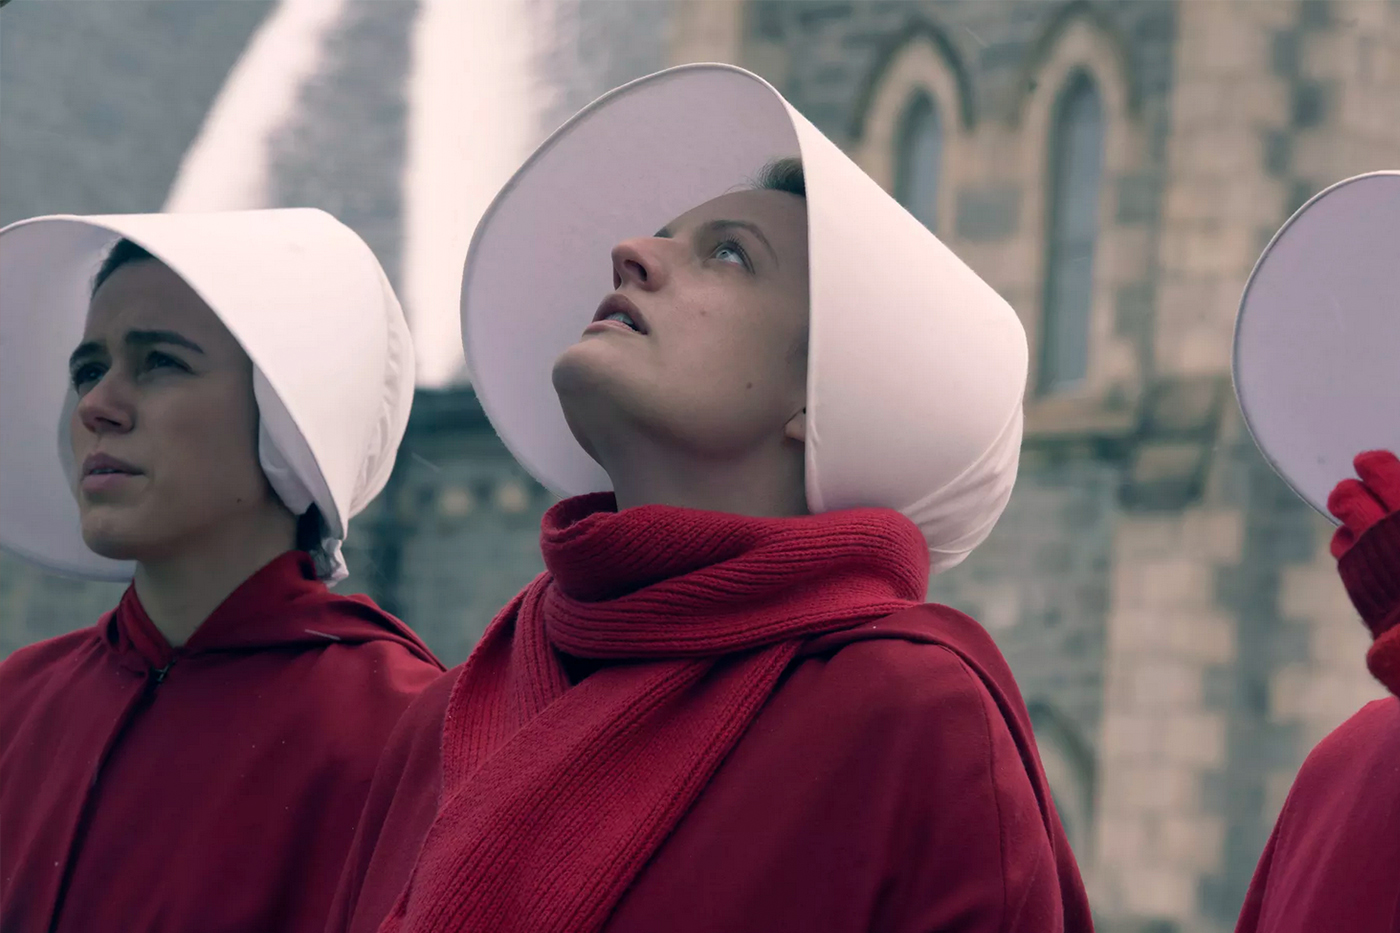 What The Handmaid’s Tale, Hulu's dystopian drama, can teach us about